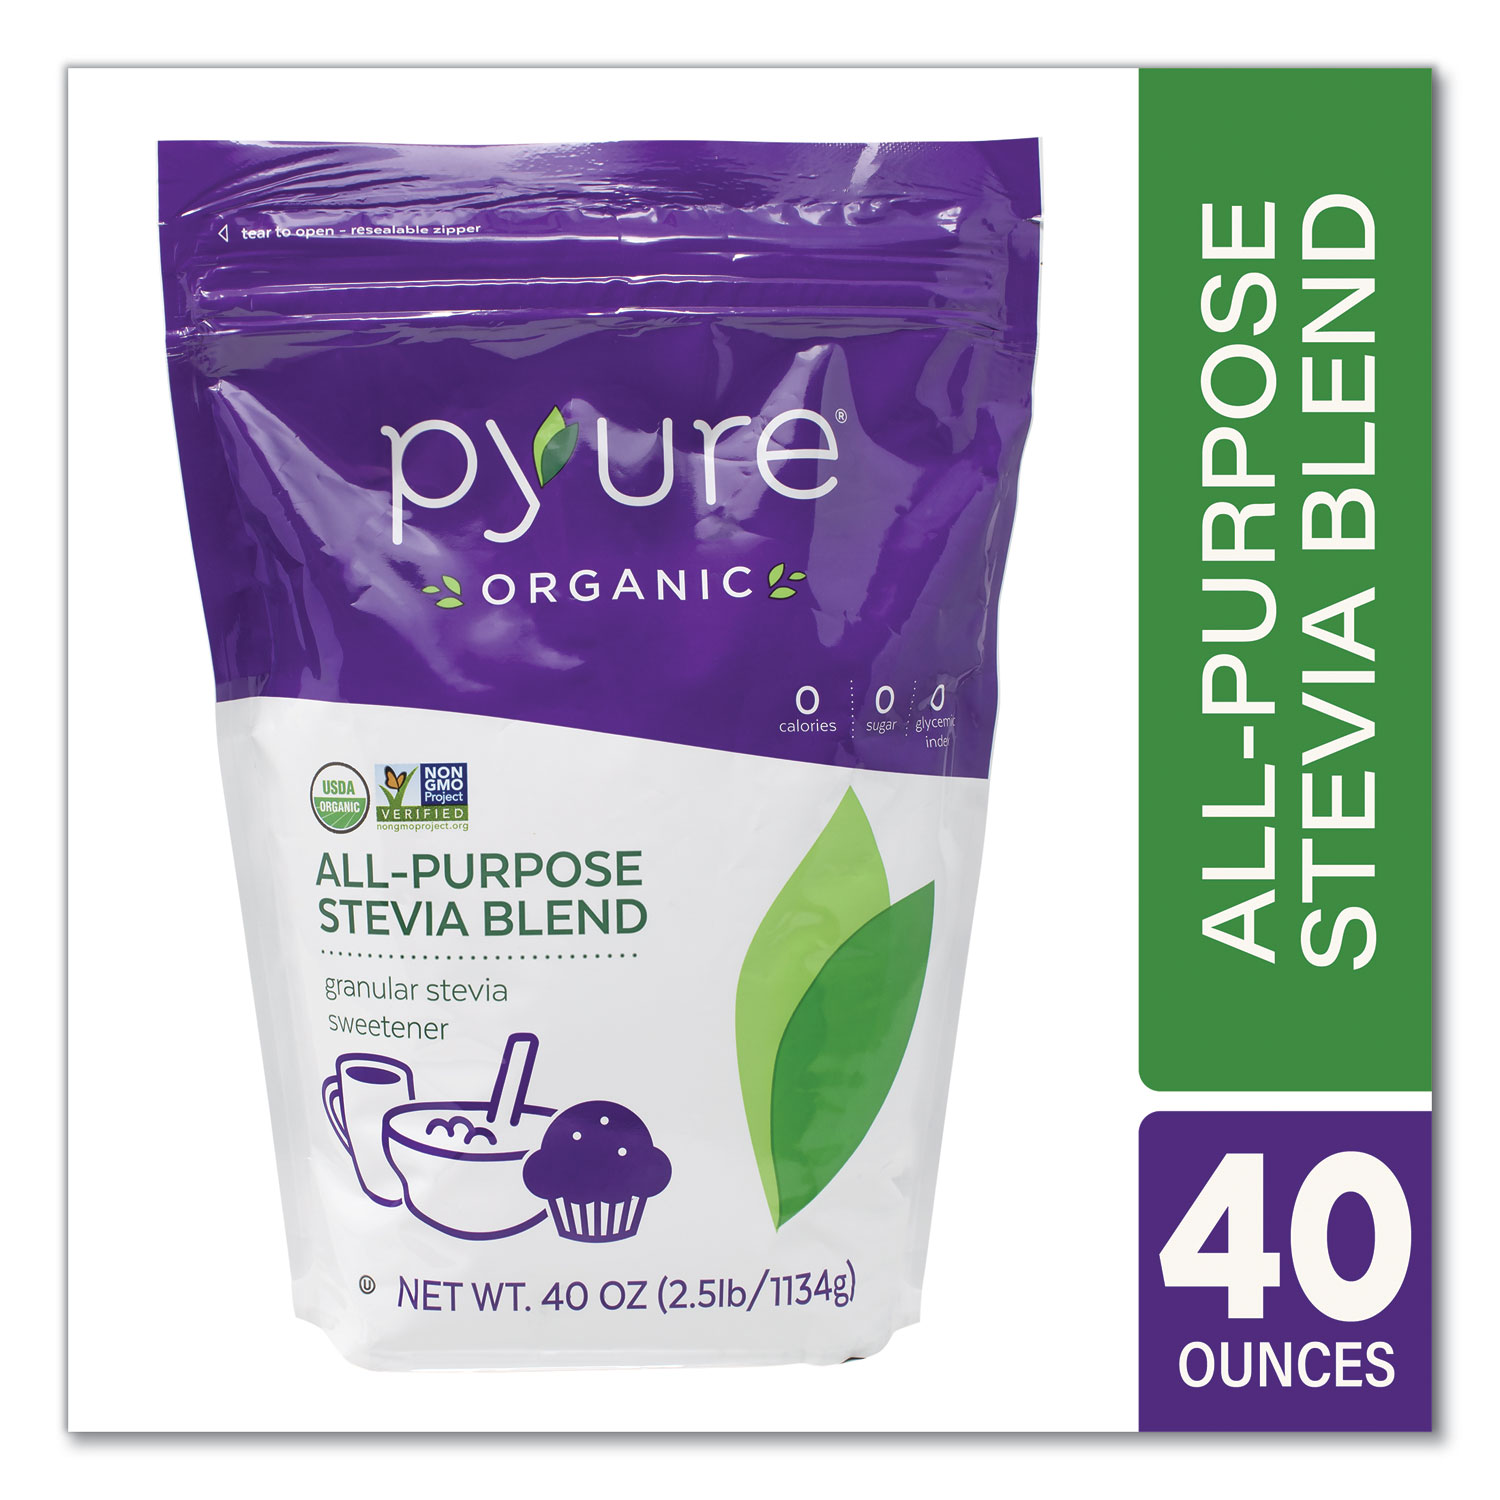  Pyure Organic Stevia 91747 All-Purpose Granular Sweetener Blend, 40 oz Bag, Free Delivery in 1-4 Business Days (GRR22001143) 